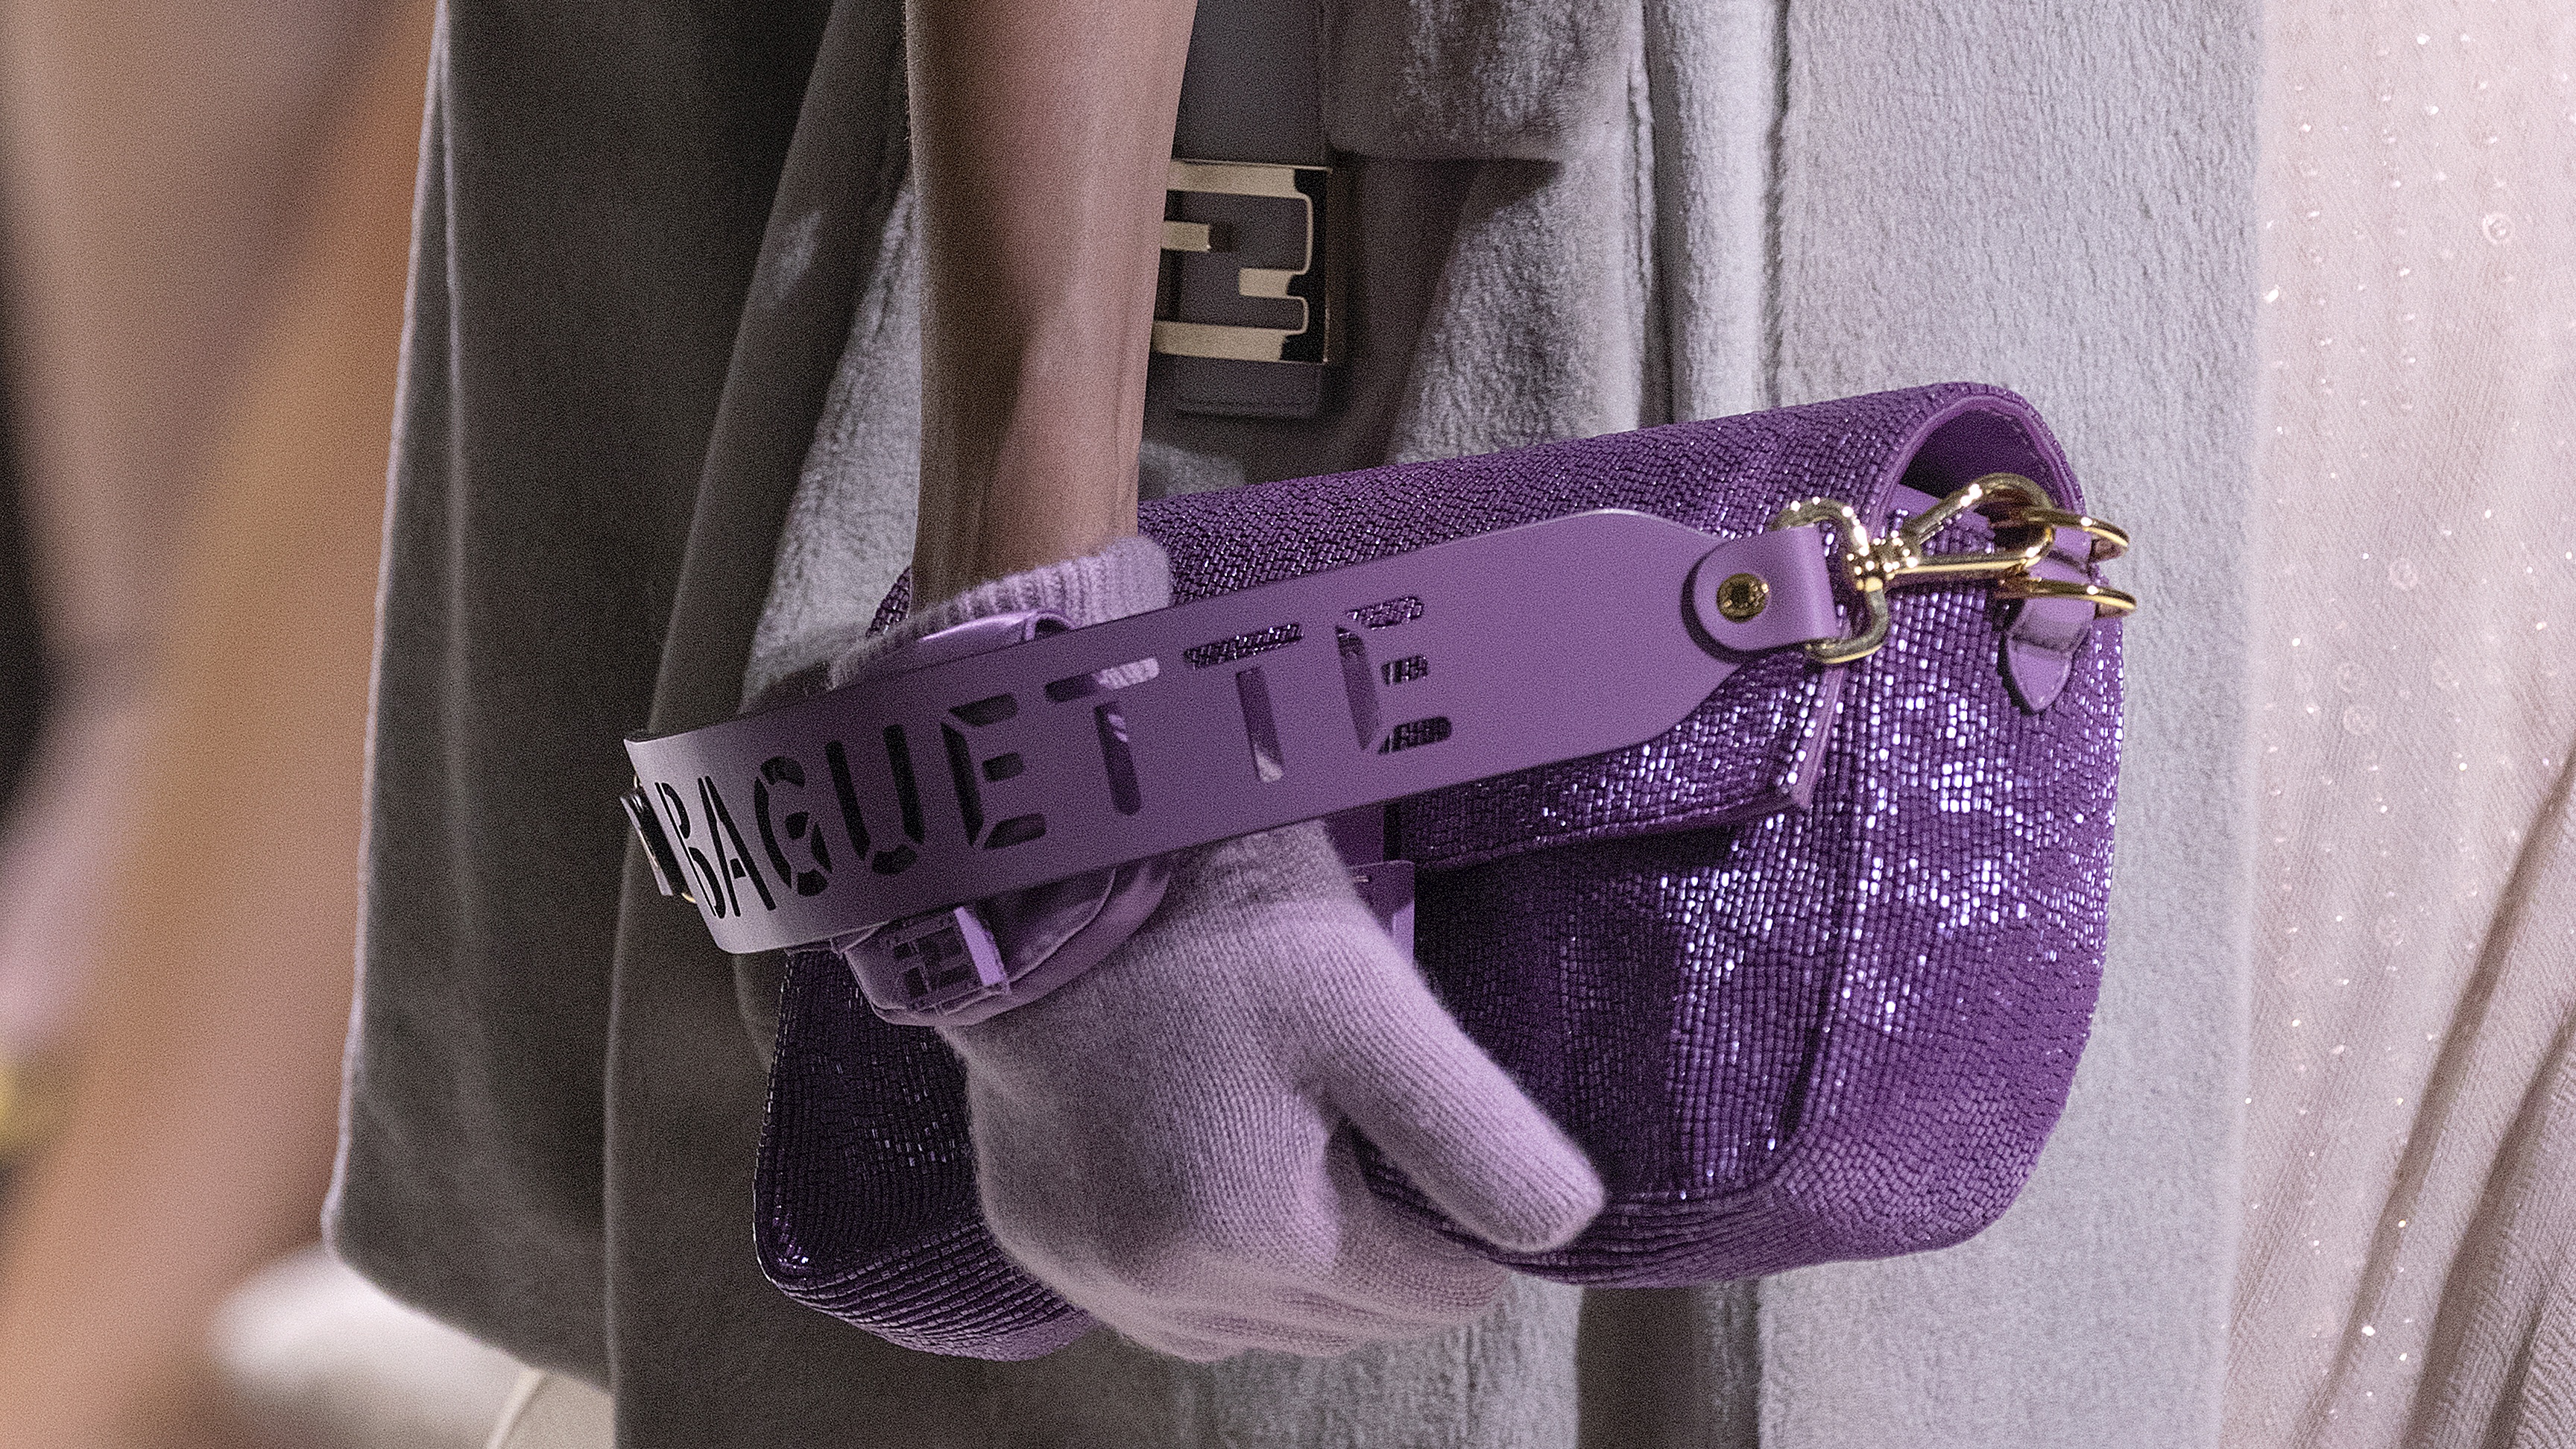 The Best Alternative to the Fendi Baguette - luxfy